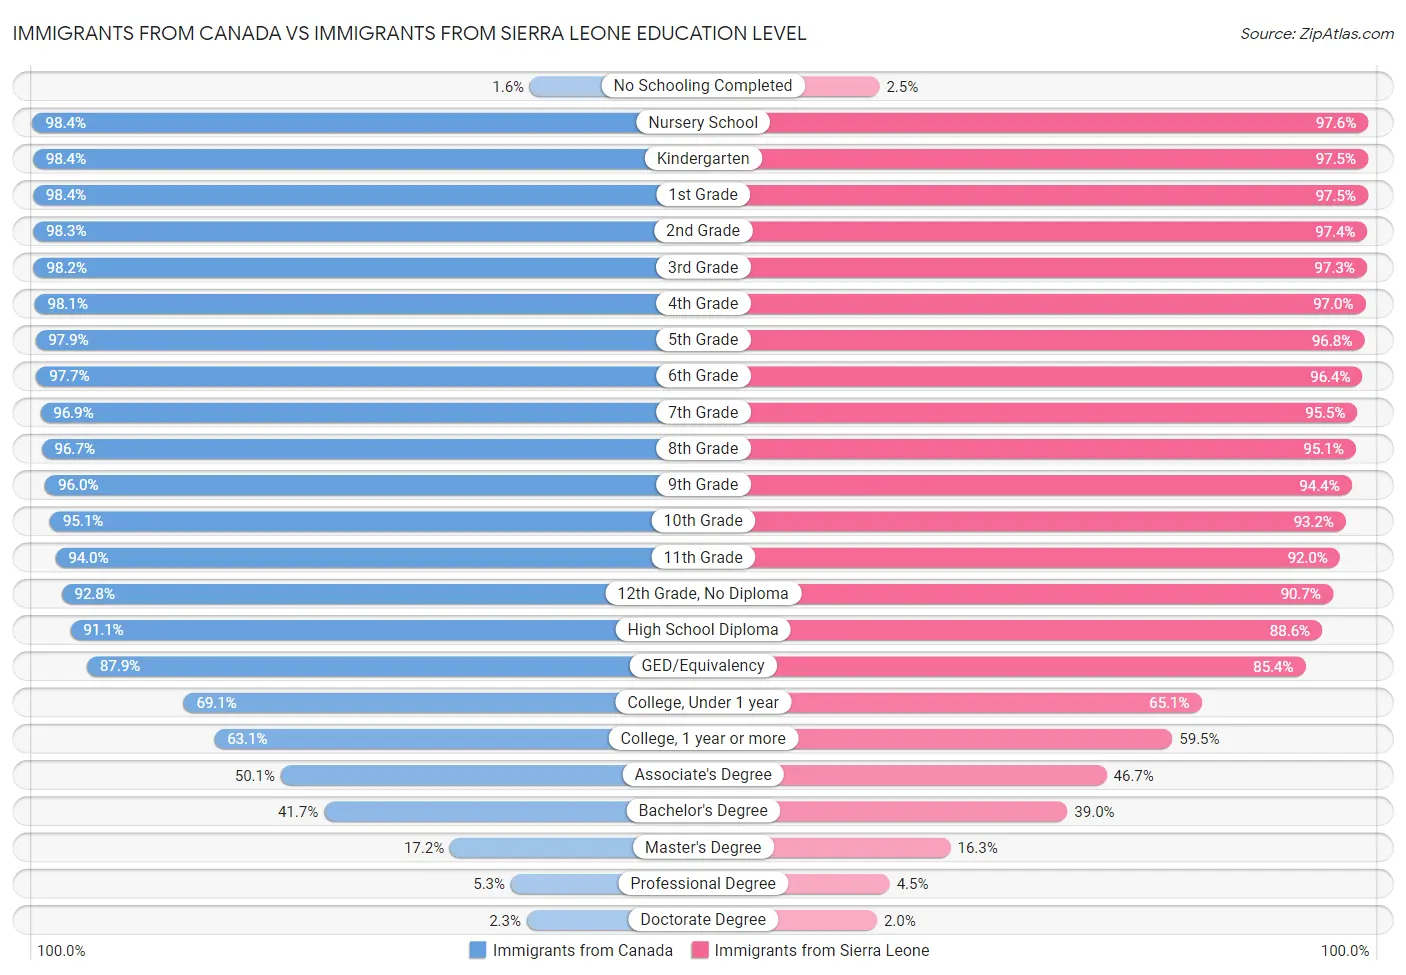 Immigrants from Canada vs Immigrants from Sierra Leone Education Level